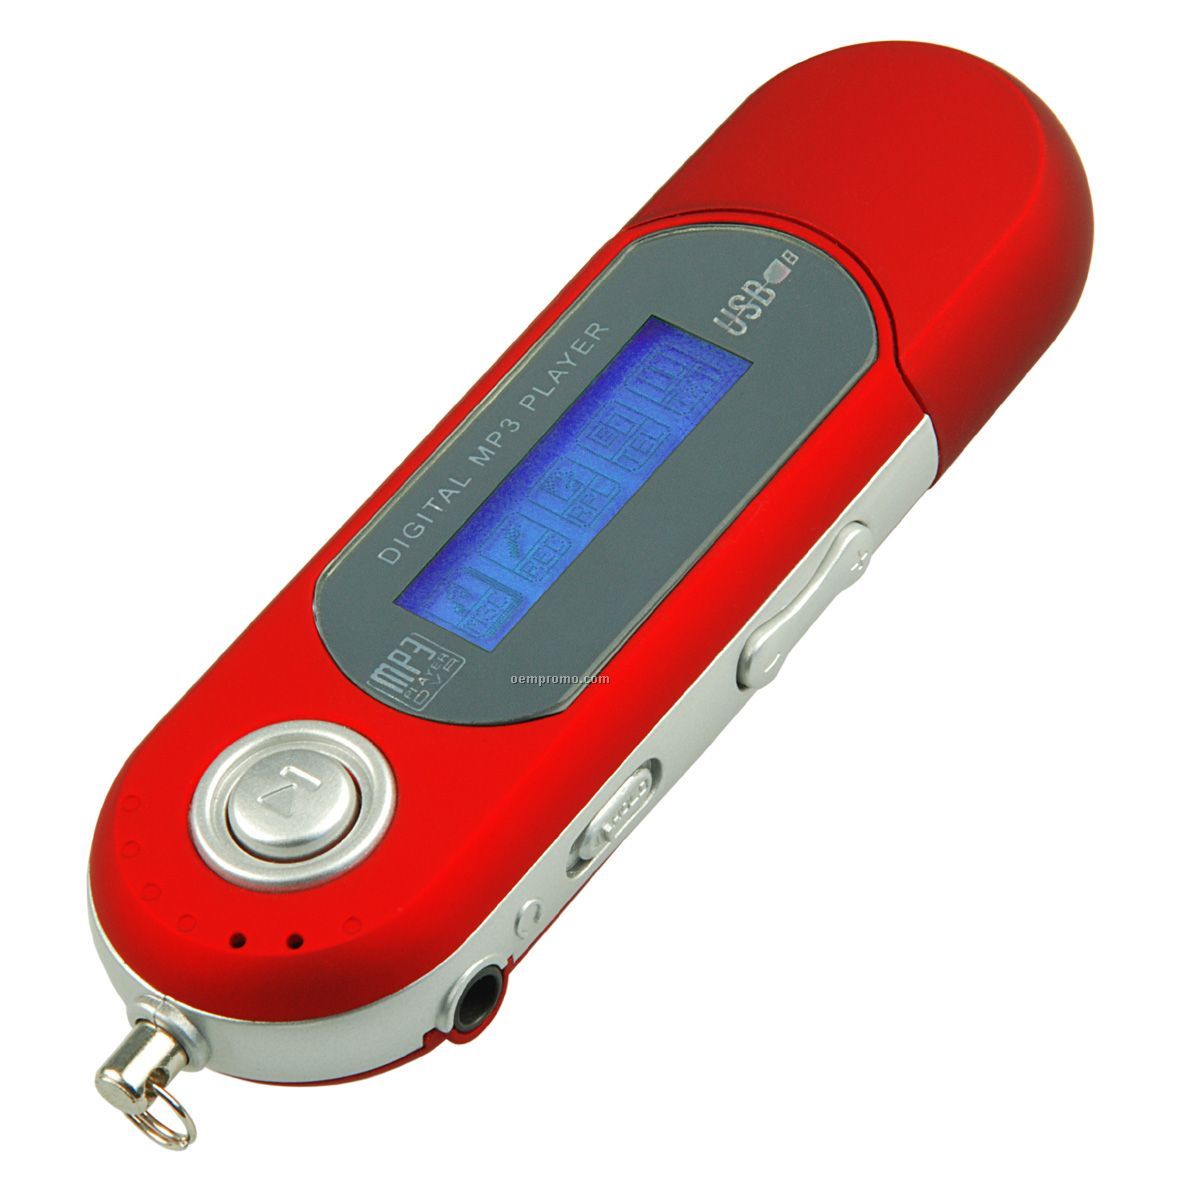 Mp3 Player With Curved Ends (1 Gb)